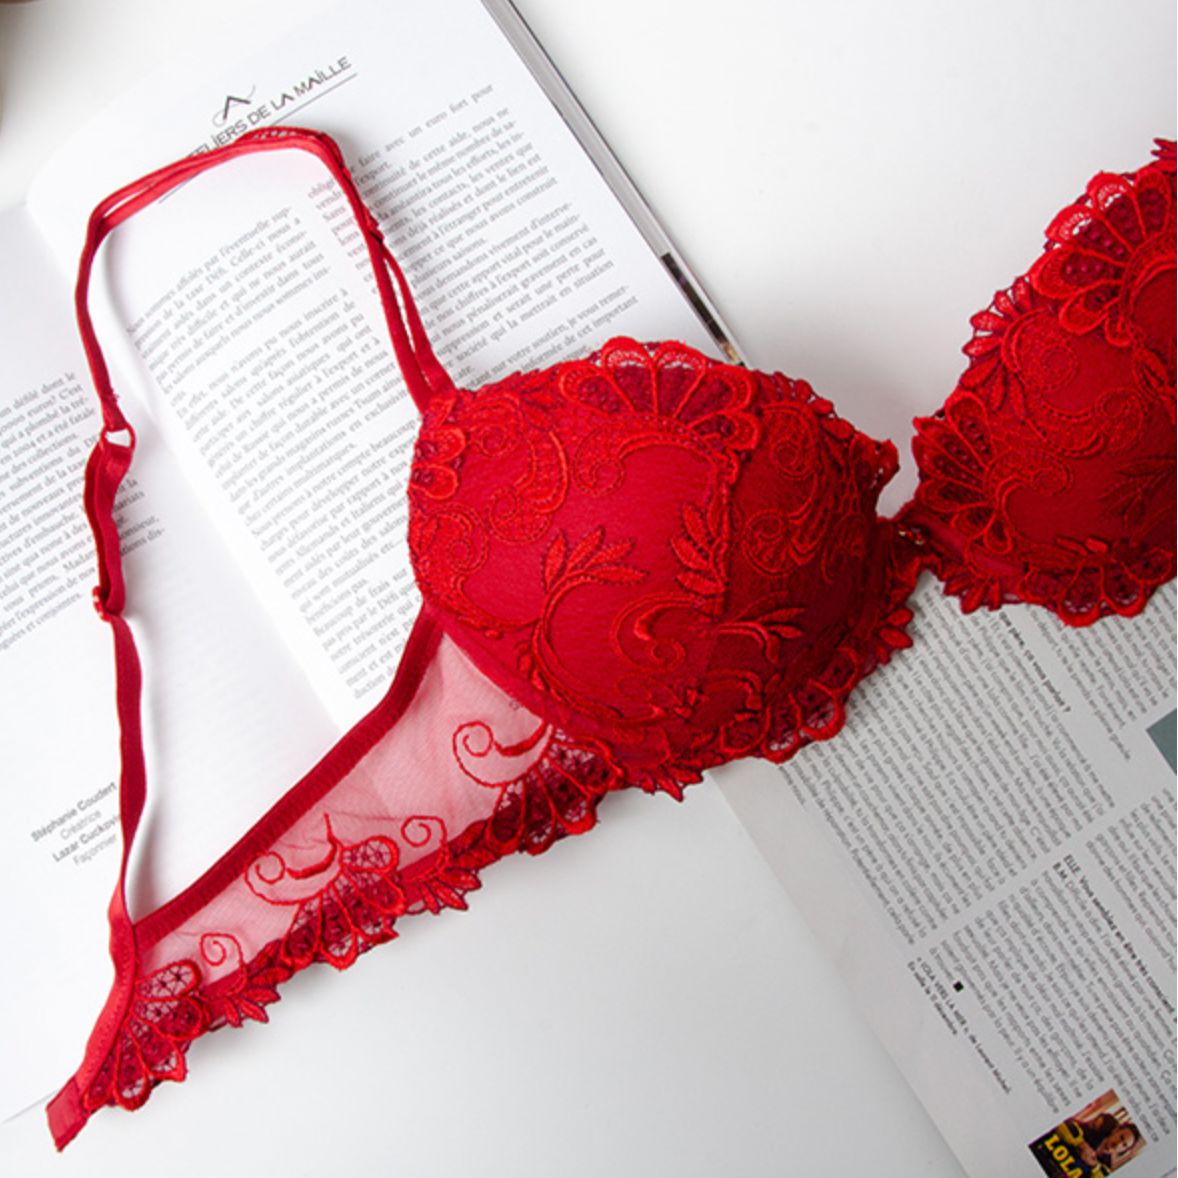 Lise Charmel Dressing Floral Contour Bra in Red ACC8588 – Anna